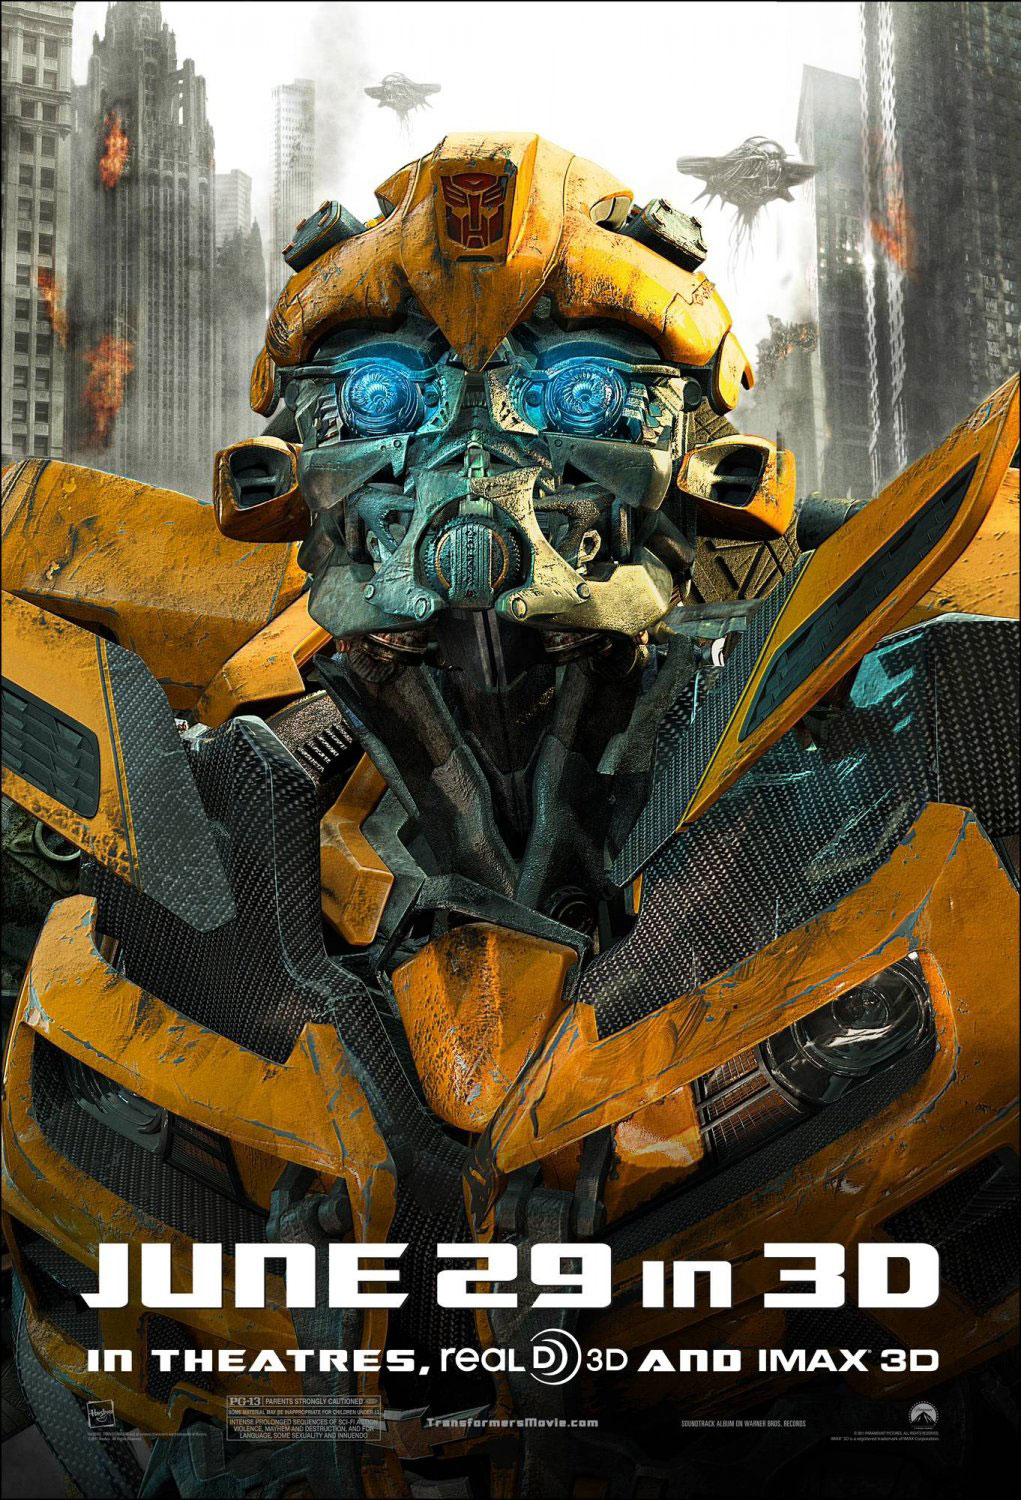 Transformers: Dark of the Moon (2011) - Movie Posters (2 of 9)